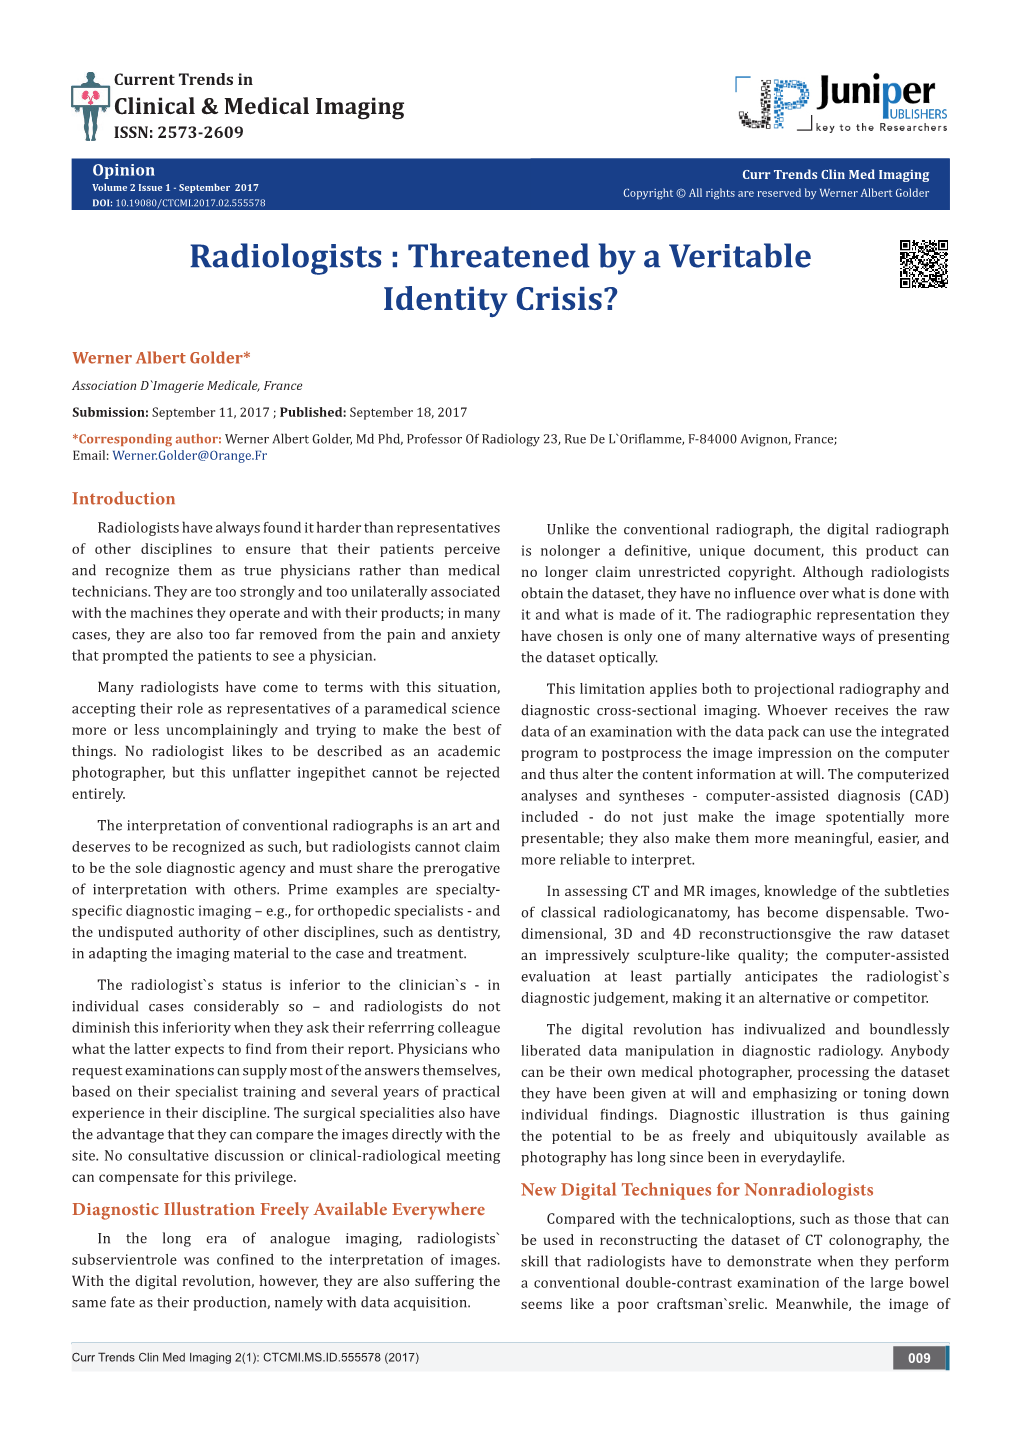 Radiologists : Threatened by a Veritable Identity Crisis?